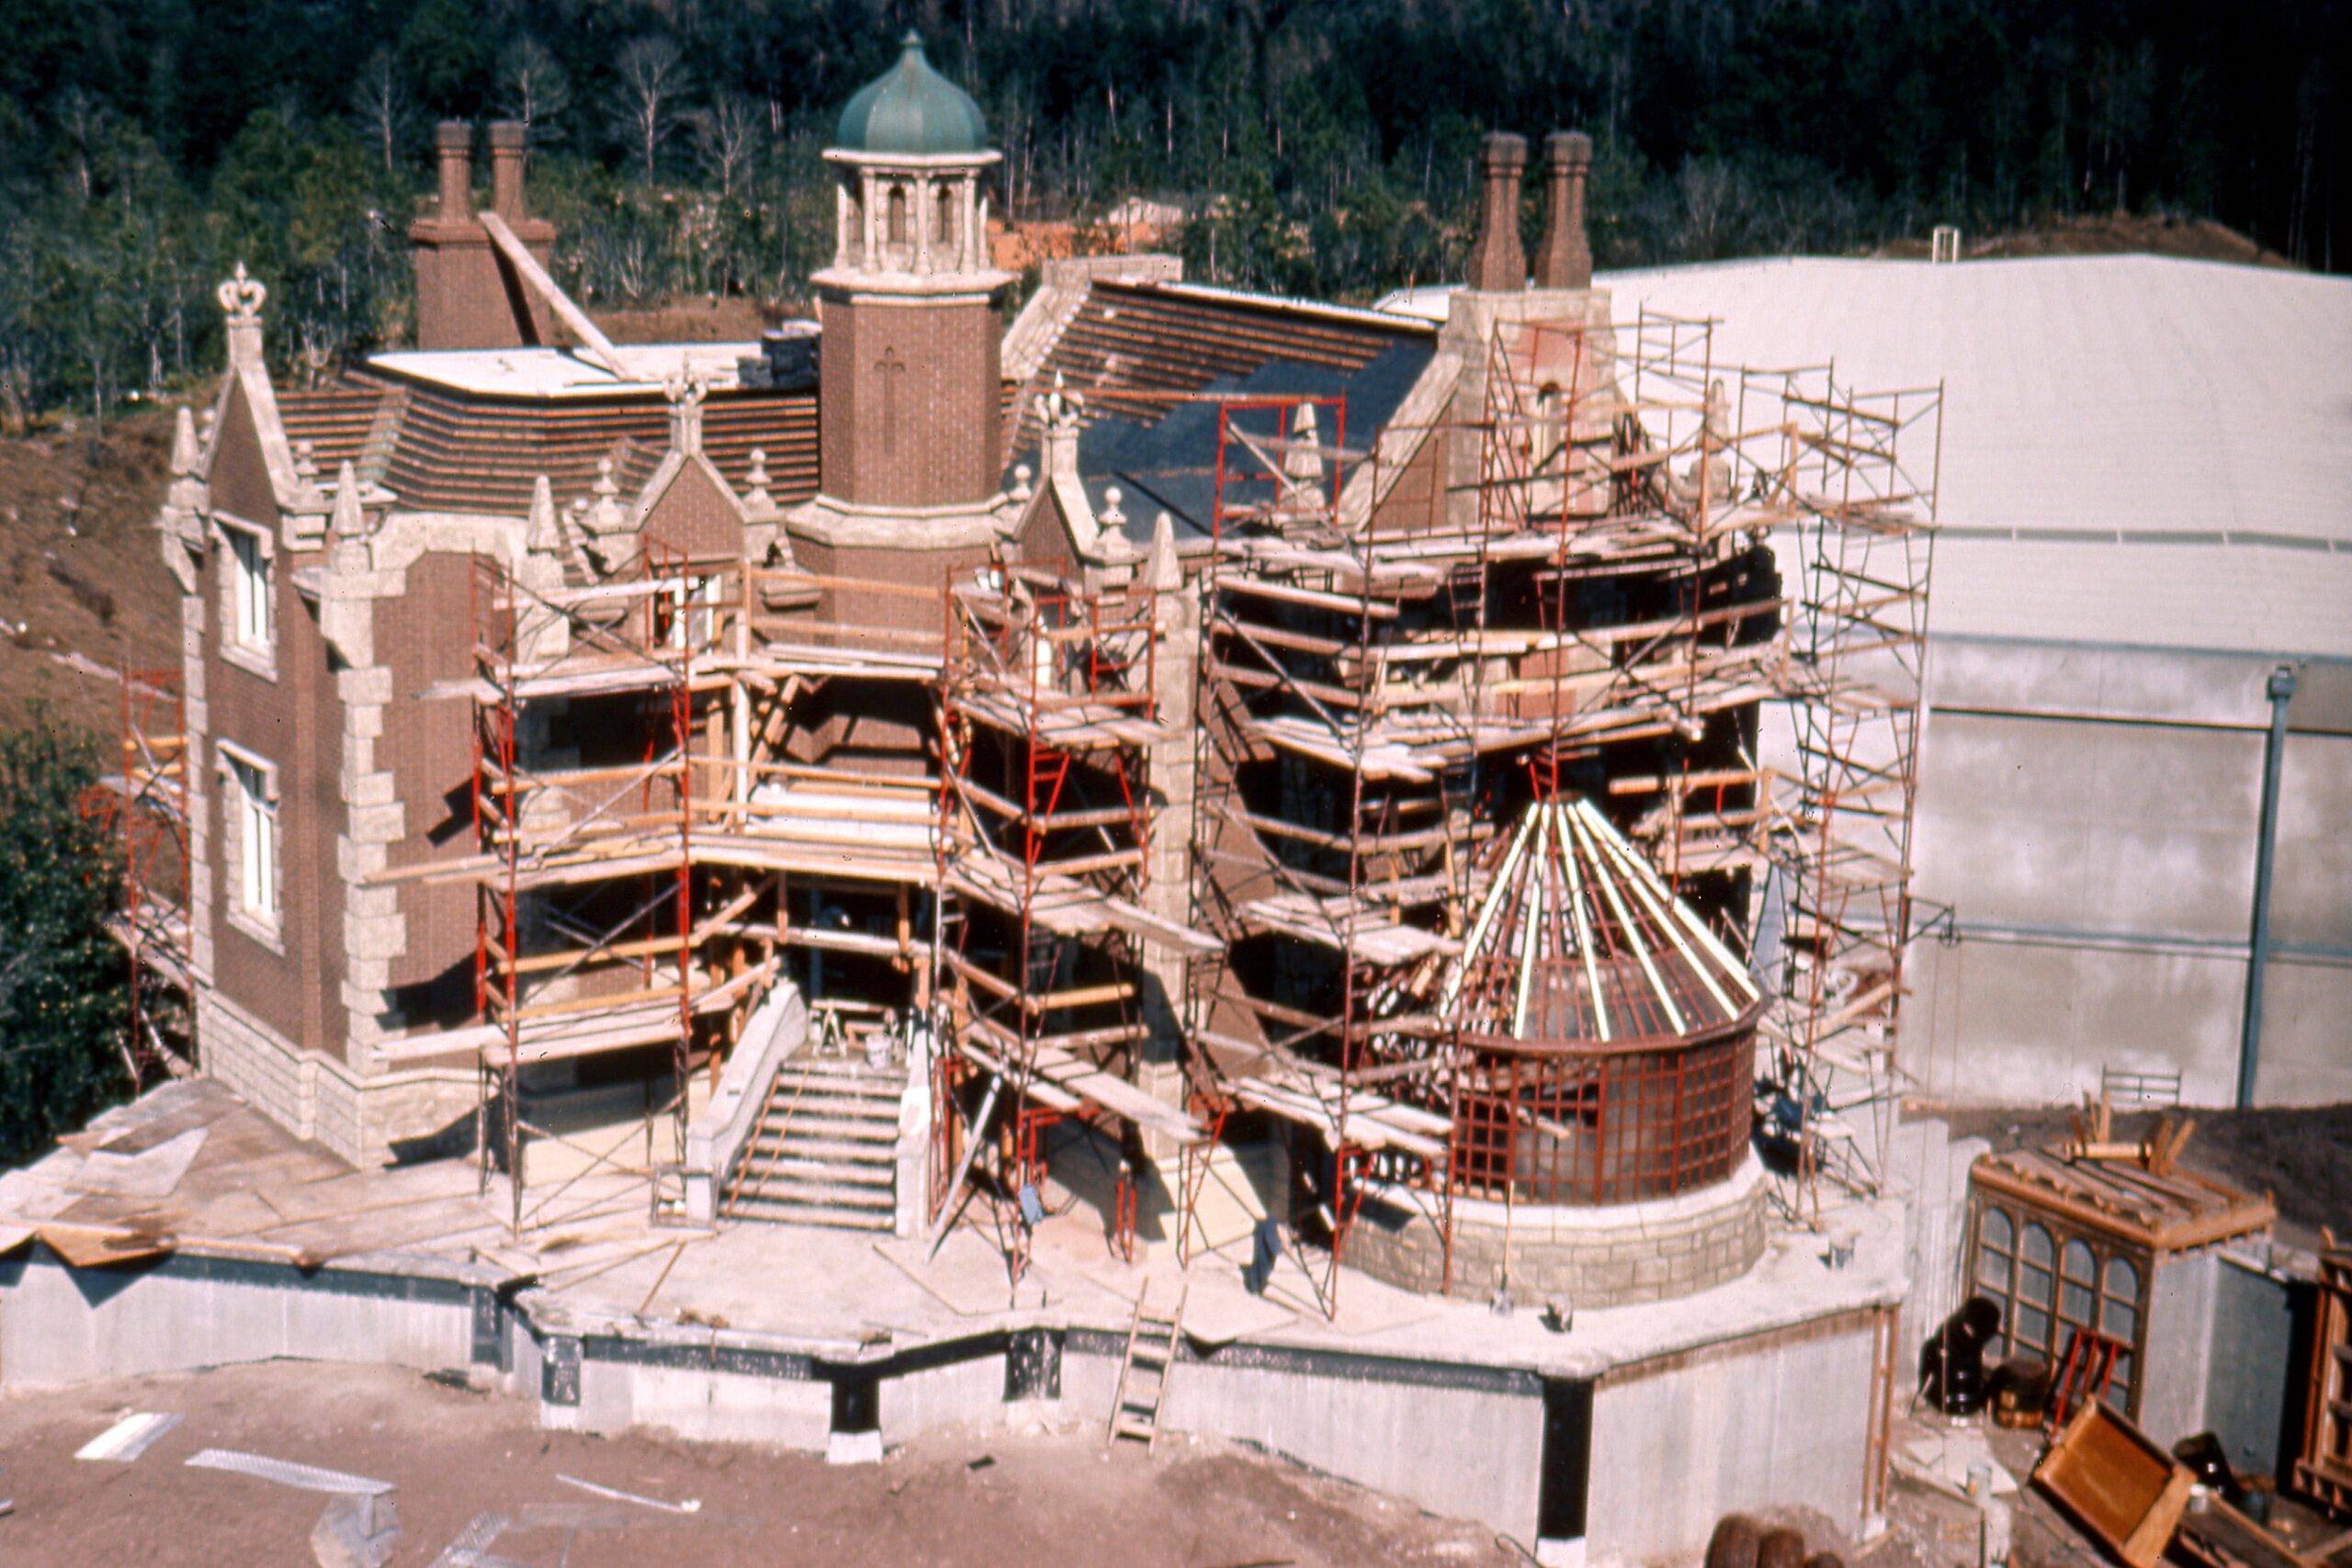 Five Decades of Magic at Walt Disney World - A look at some rare construction photos from 1971 - 1979